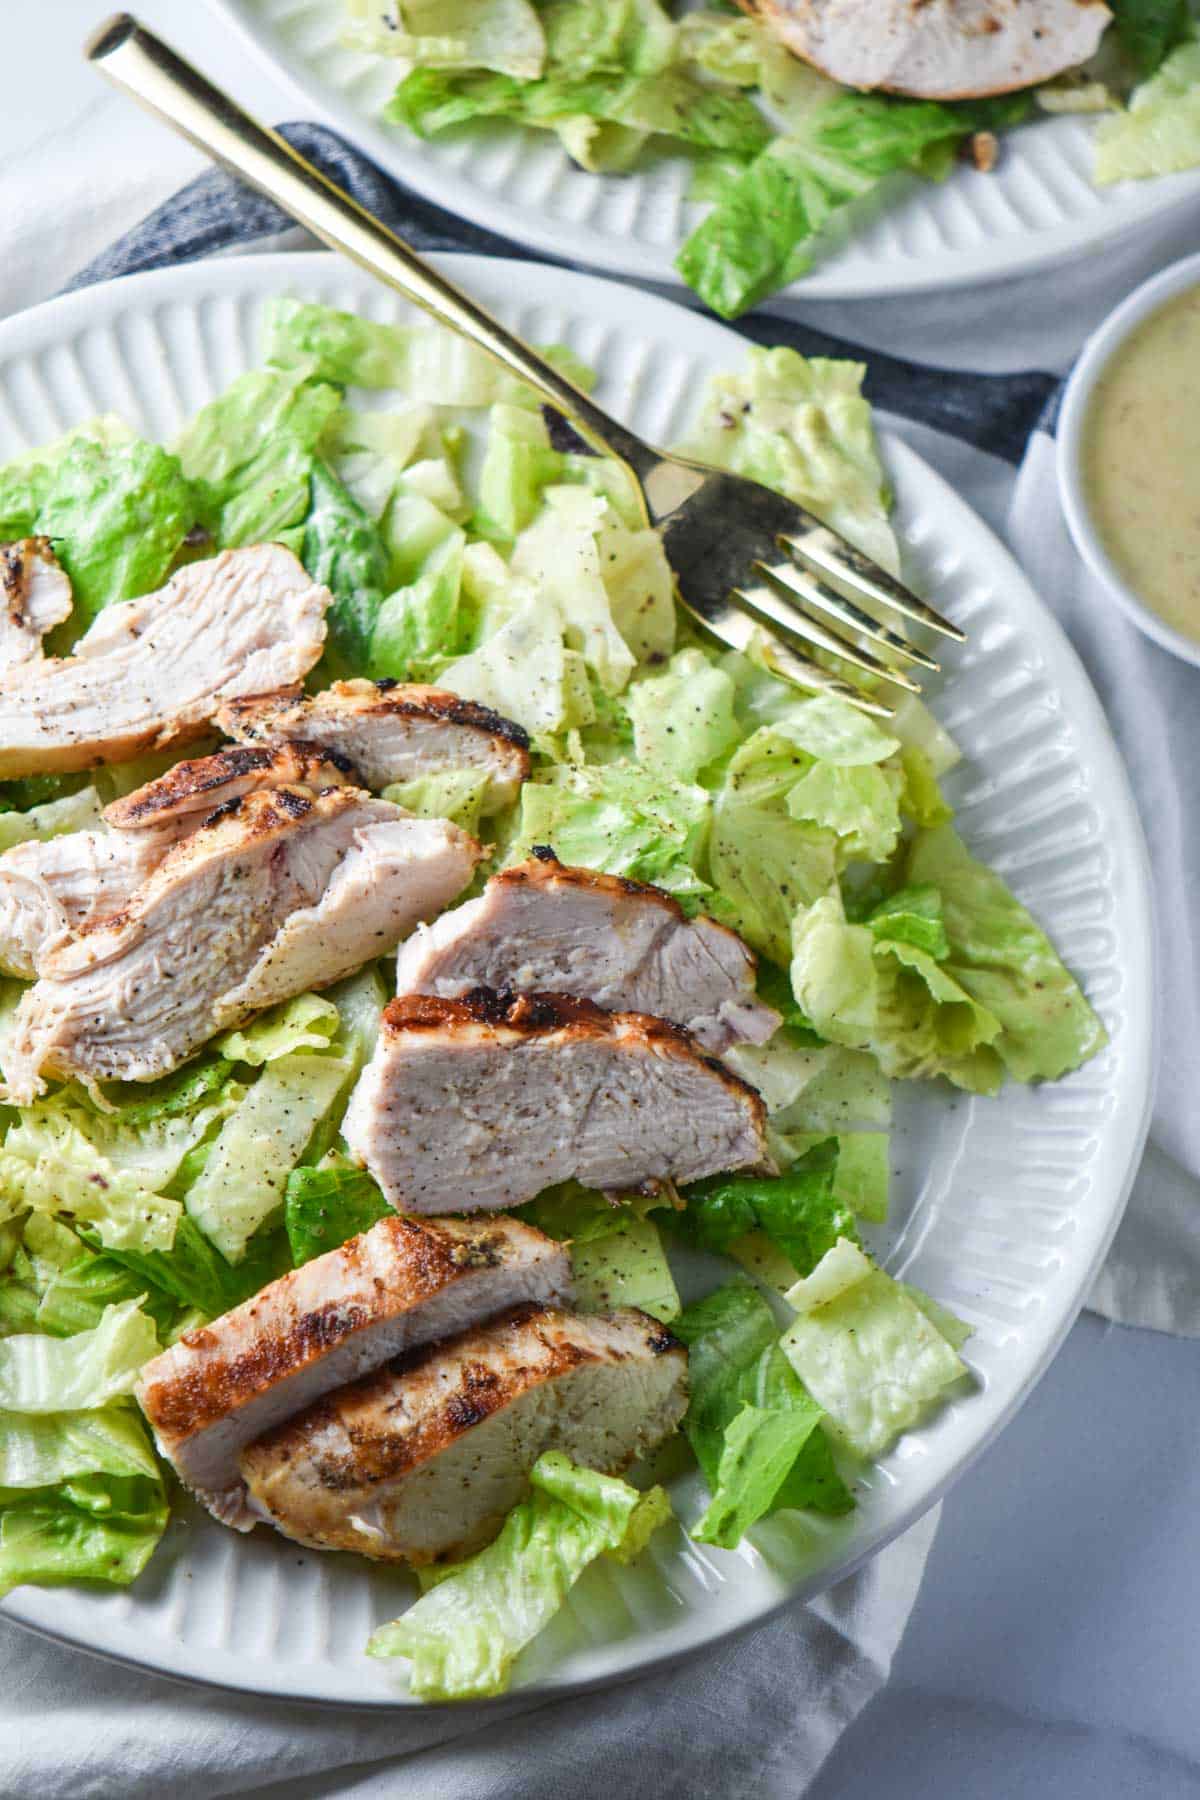 A Caesar salad on a white plate with a gold fork.